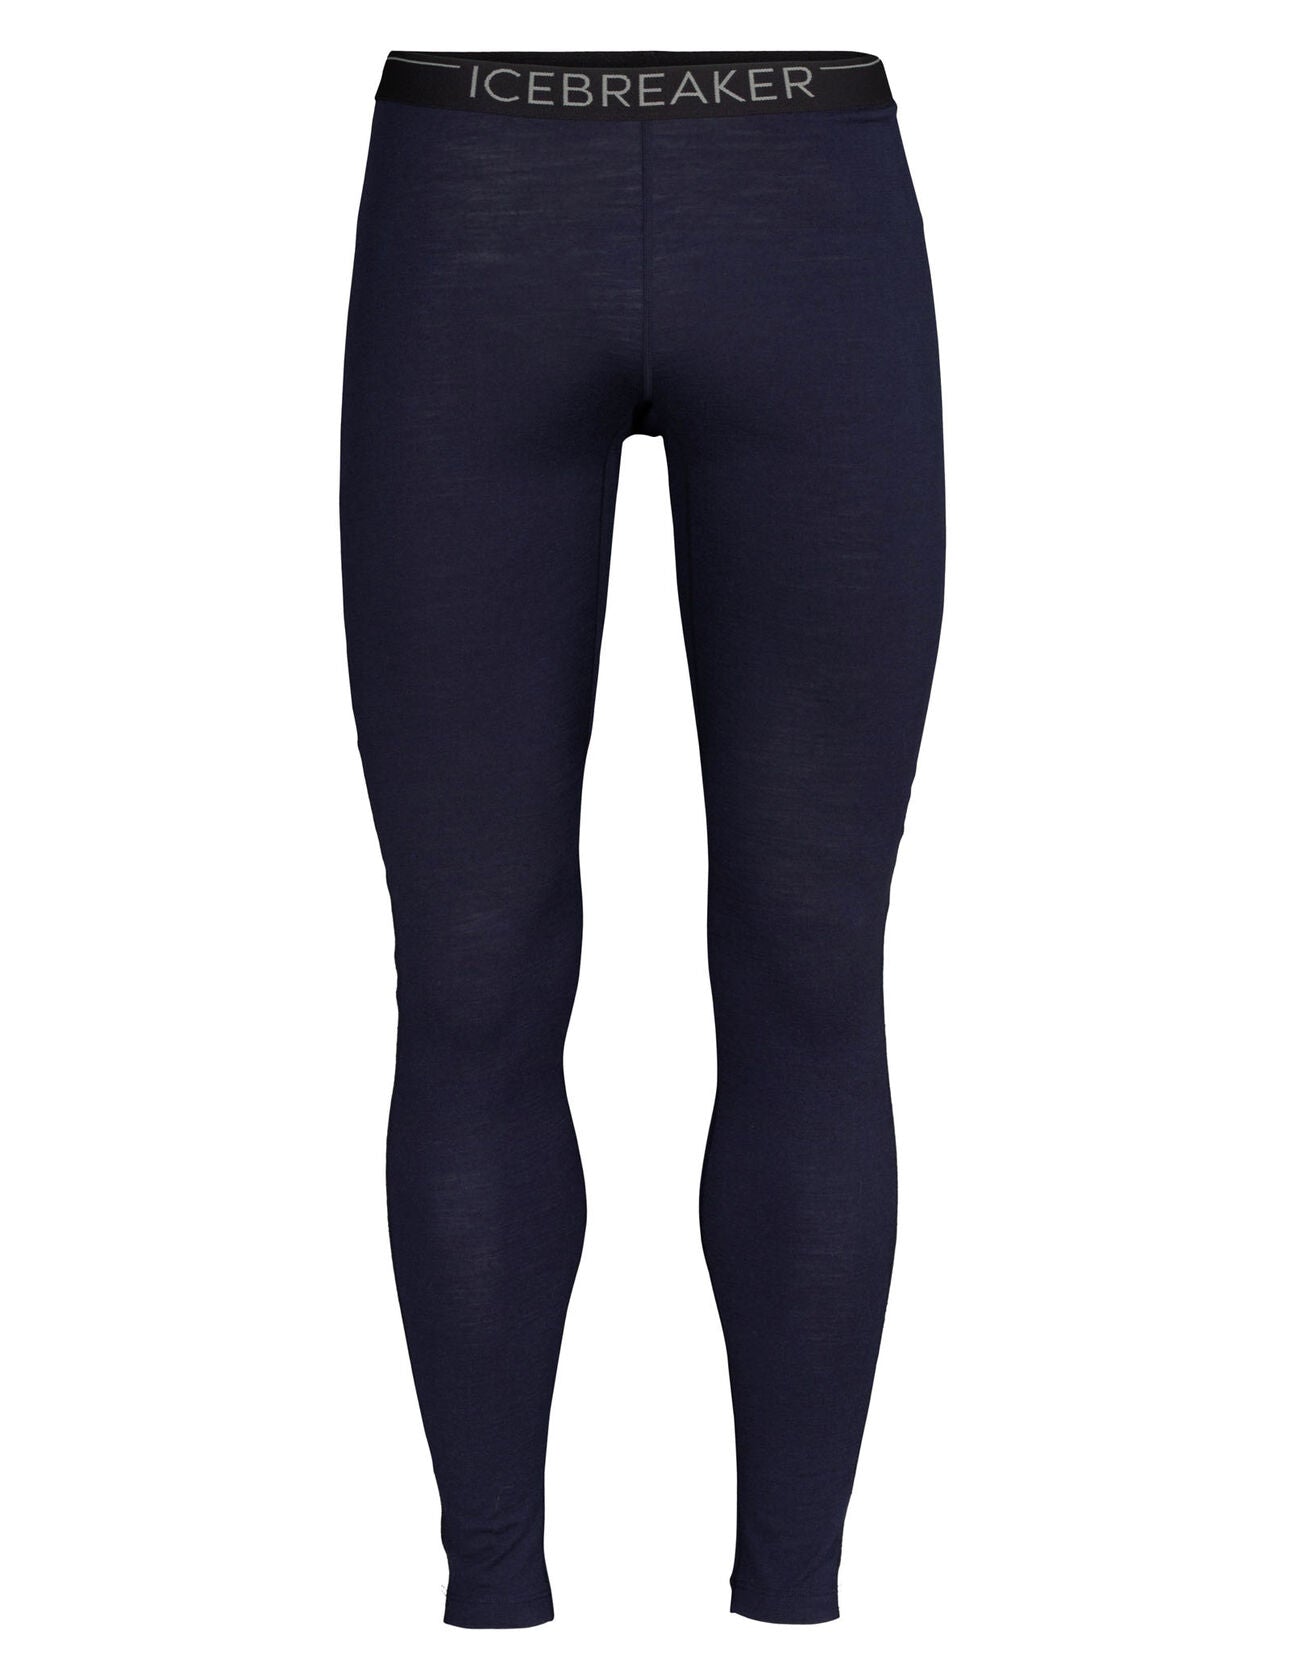 Men's Base Layer & Insulated Bottoms